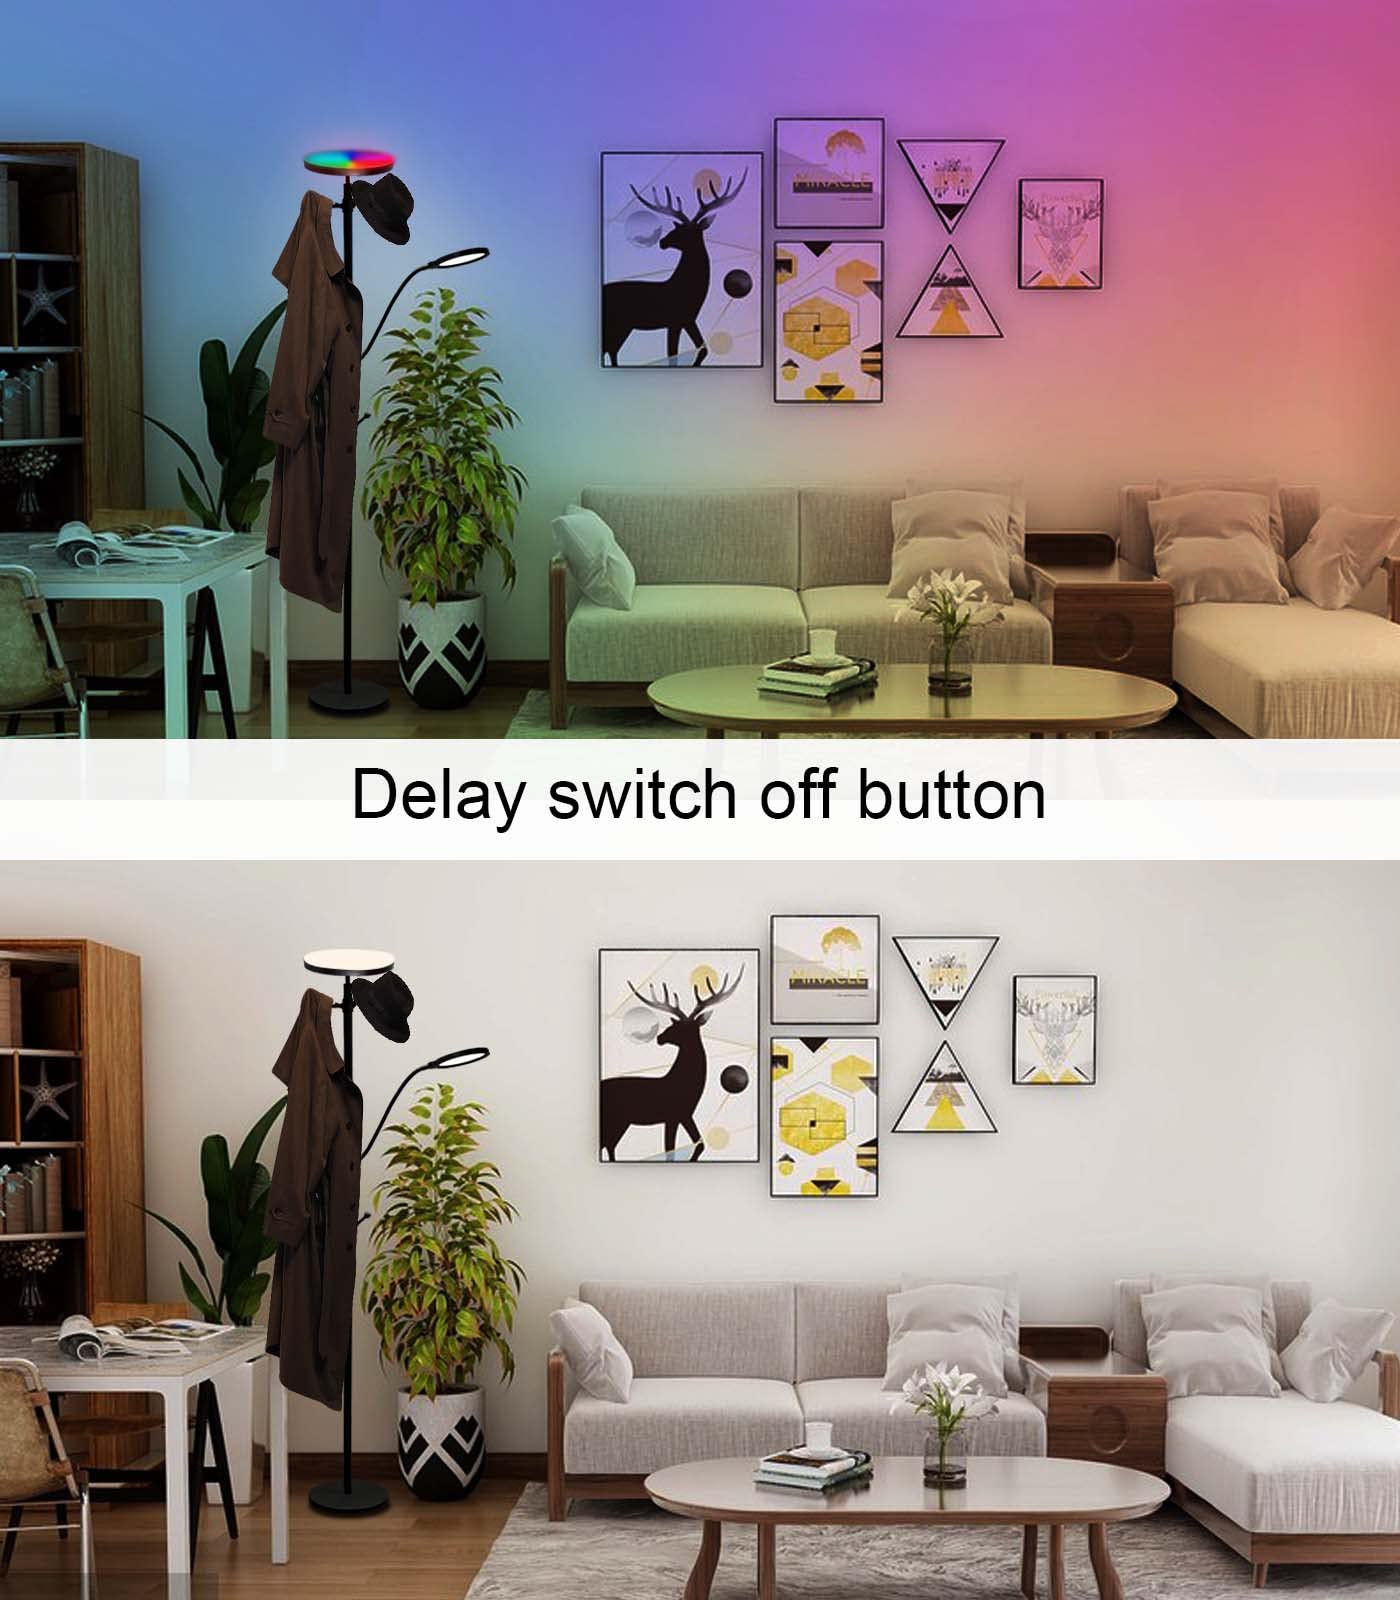 Ovensty RGB Coat Rack Floor Lamp,LED Bright Modern Corner Floor Lamps with Reading Light,Color Changing & Dimmable Smart APP & Remote Control Tall Standing Lights for Living Room,Bedroom,Office(Black)